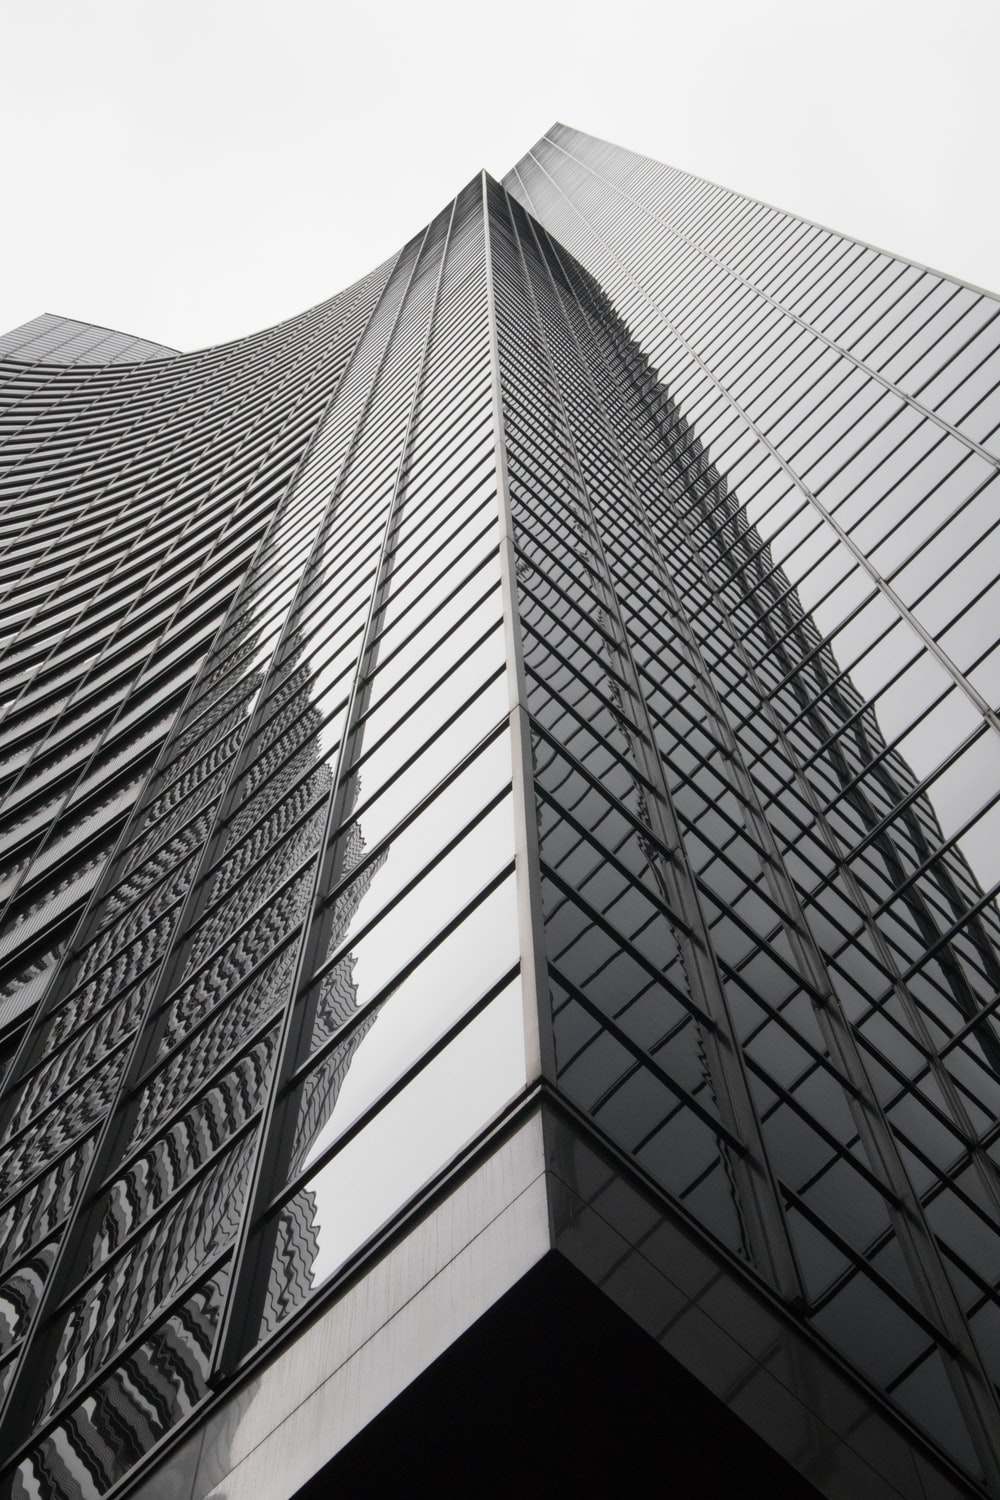 Black And White Building Pictures Image On